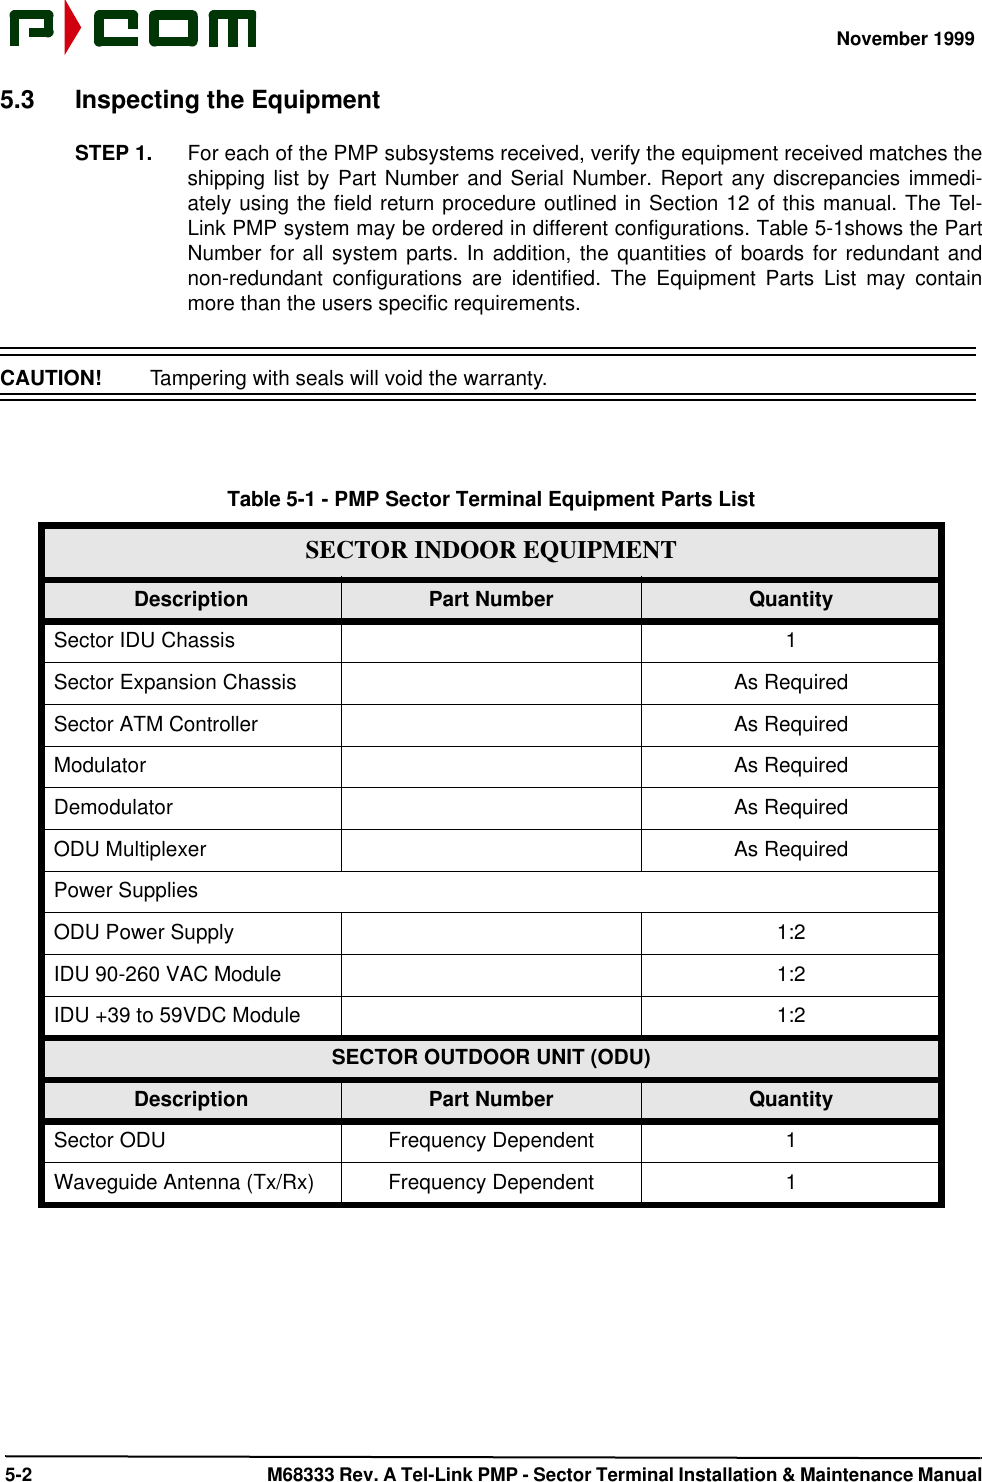 November 1999 5-2  M68333 Rev. A Tel-Link PMP - Sector Terminal Installation &amp; Maintenance Manual5.3 Inspecting the EquipmentSTEP 1. For each of the PMP subsystems received, verify the equipment received matches theshipping list by Part Number and Serial Number. Report any discrepancies immedi-ately using the field return procedure outlined in Section 12 of this manual. The Tel-Link PMP system may be ordered in different configurations. Table 5-1shows the PartNumber for all system parts. In addition, the quantities of boards for redundant andnon-redundant configurations are identified. The Equipment Parts List may containmore than the users specific requirements.CAUTION!  Tampering with seals will void the warranty.Table 5-1 - PMP Sector Terminal Equipment Parts ListSECTOR INDOOR EQUIPMENTDescription Part Number QuantitySector IDU Chassis 1Sector Expansion Chassis As RequiredSector ATM Controller As RequiredModulator As RequiredDemodulator As RequiredODU Multiplexer As RequiredPower SuppliesODU Power Supply 1:2IDU 90-260 VAC Module 1:2IDU +39 to 59VDC Module 1:2SECTOR OUTDOOR UNIT (ODU)Description Part Number QuantitySector ODU Frequency Dependent 1Waveguide Antenna (Tx/Rx) Frequency Dependent 1